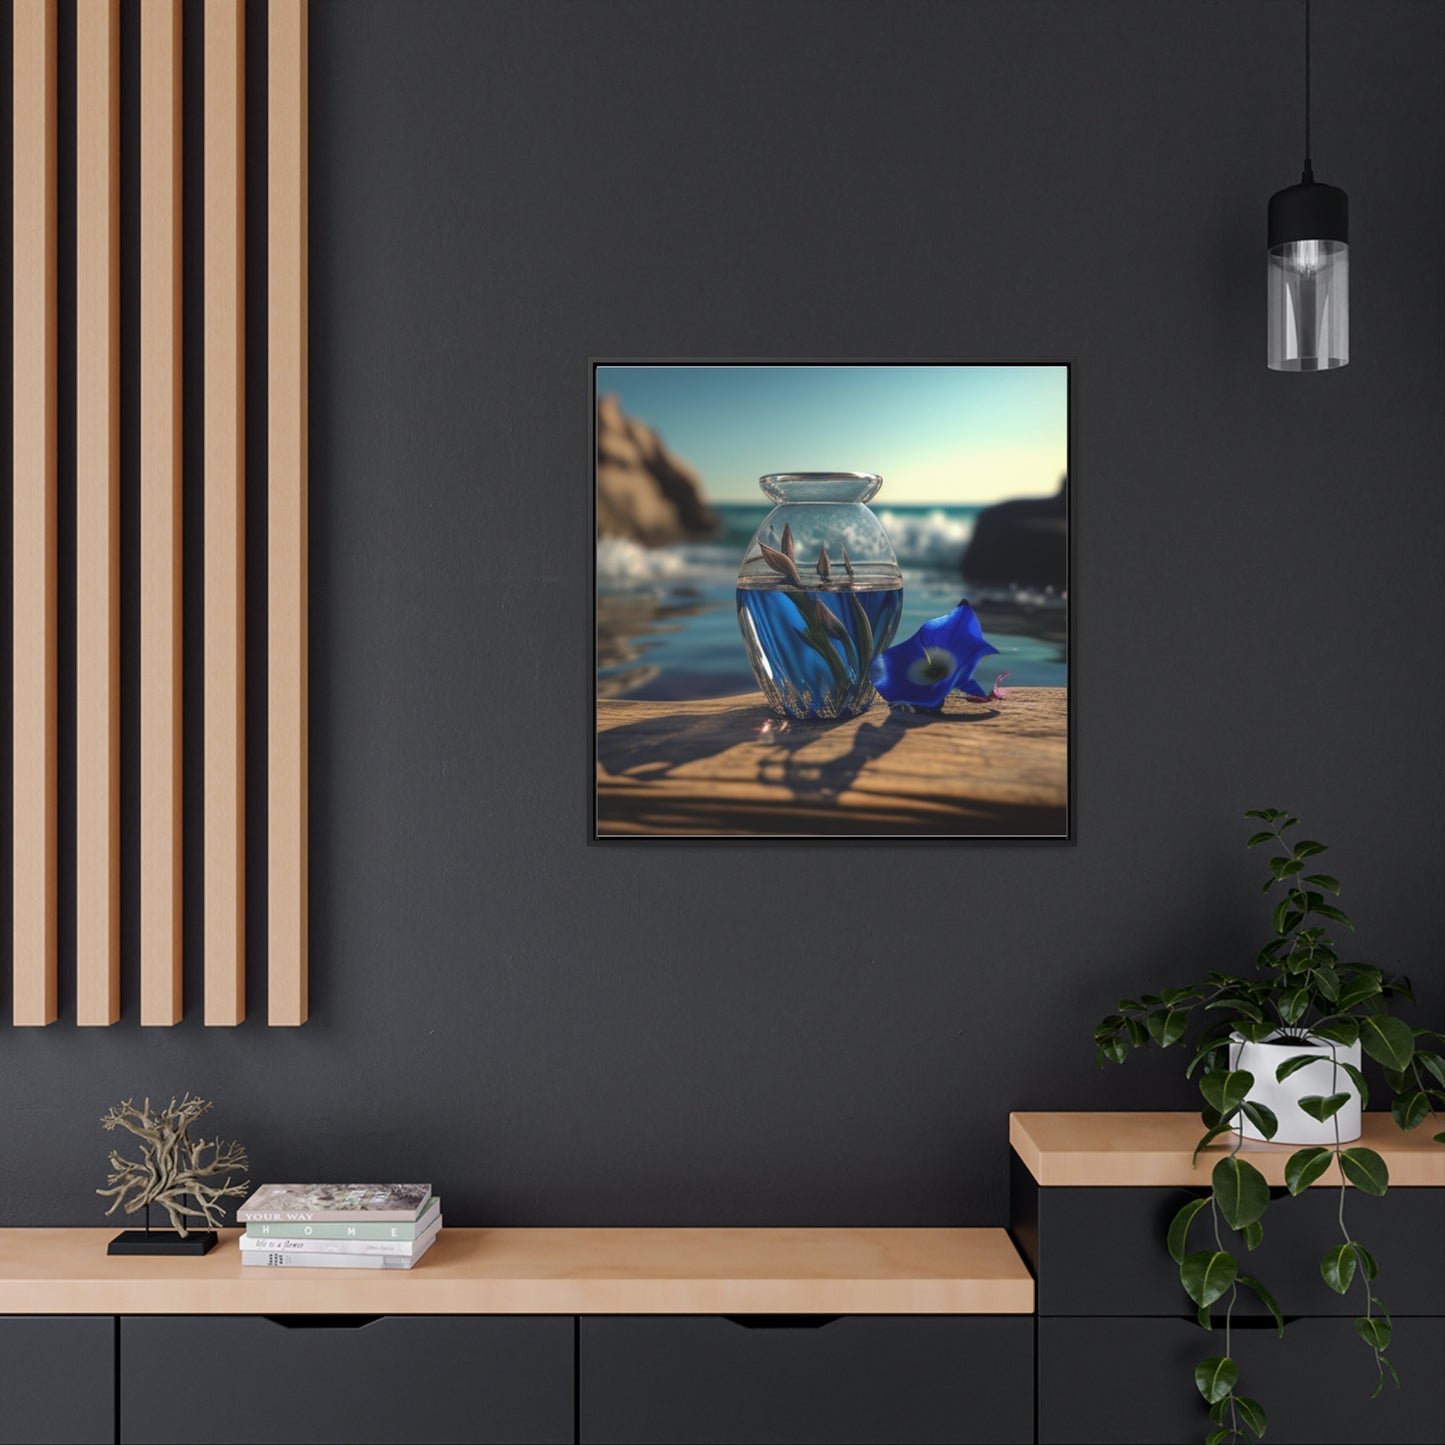 Gallery Canvas Wraps, Square Frame The Bluebell 4